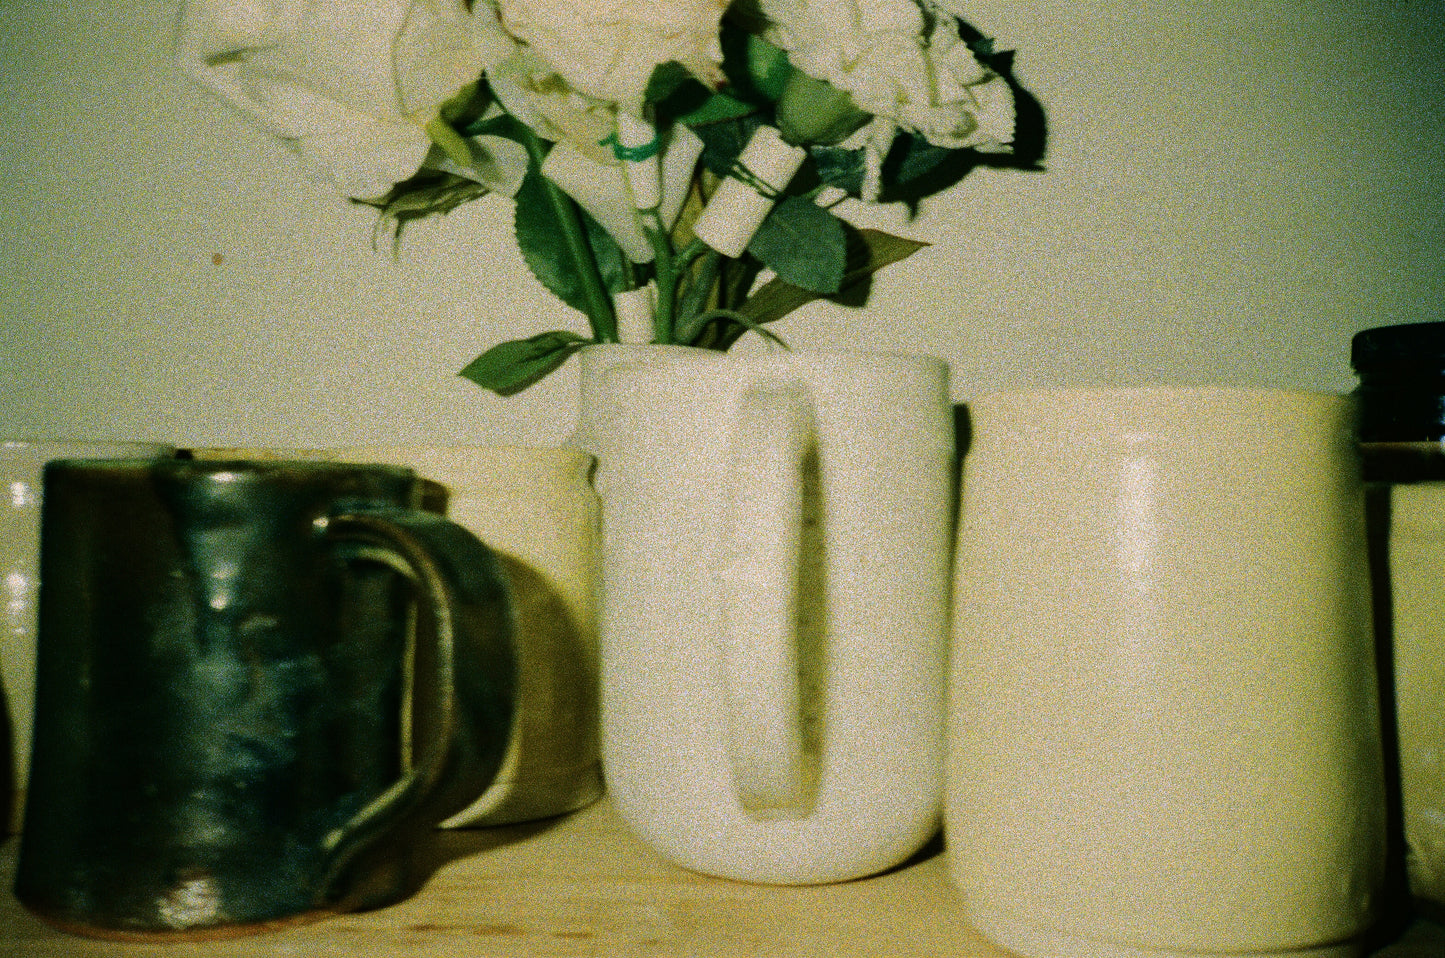 Grainy film photo of a collection of mugs.